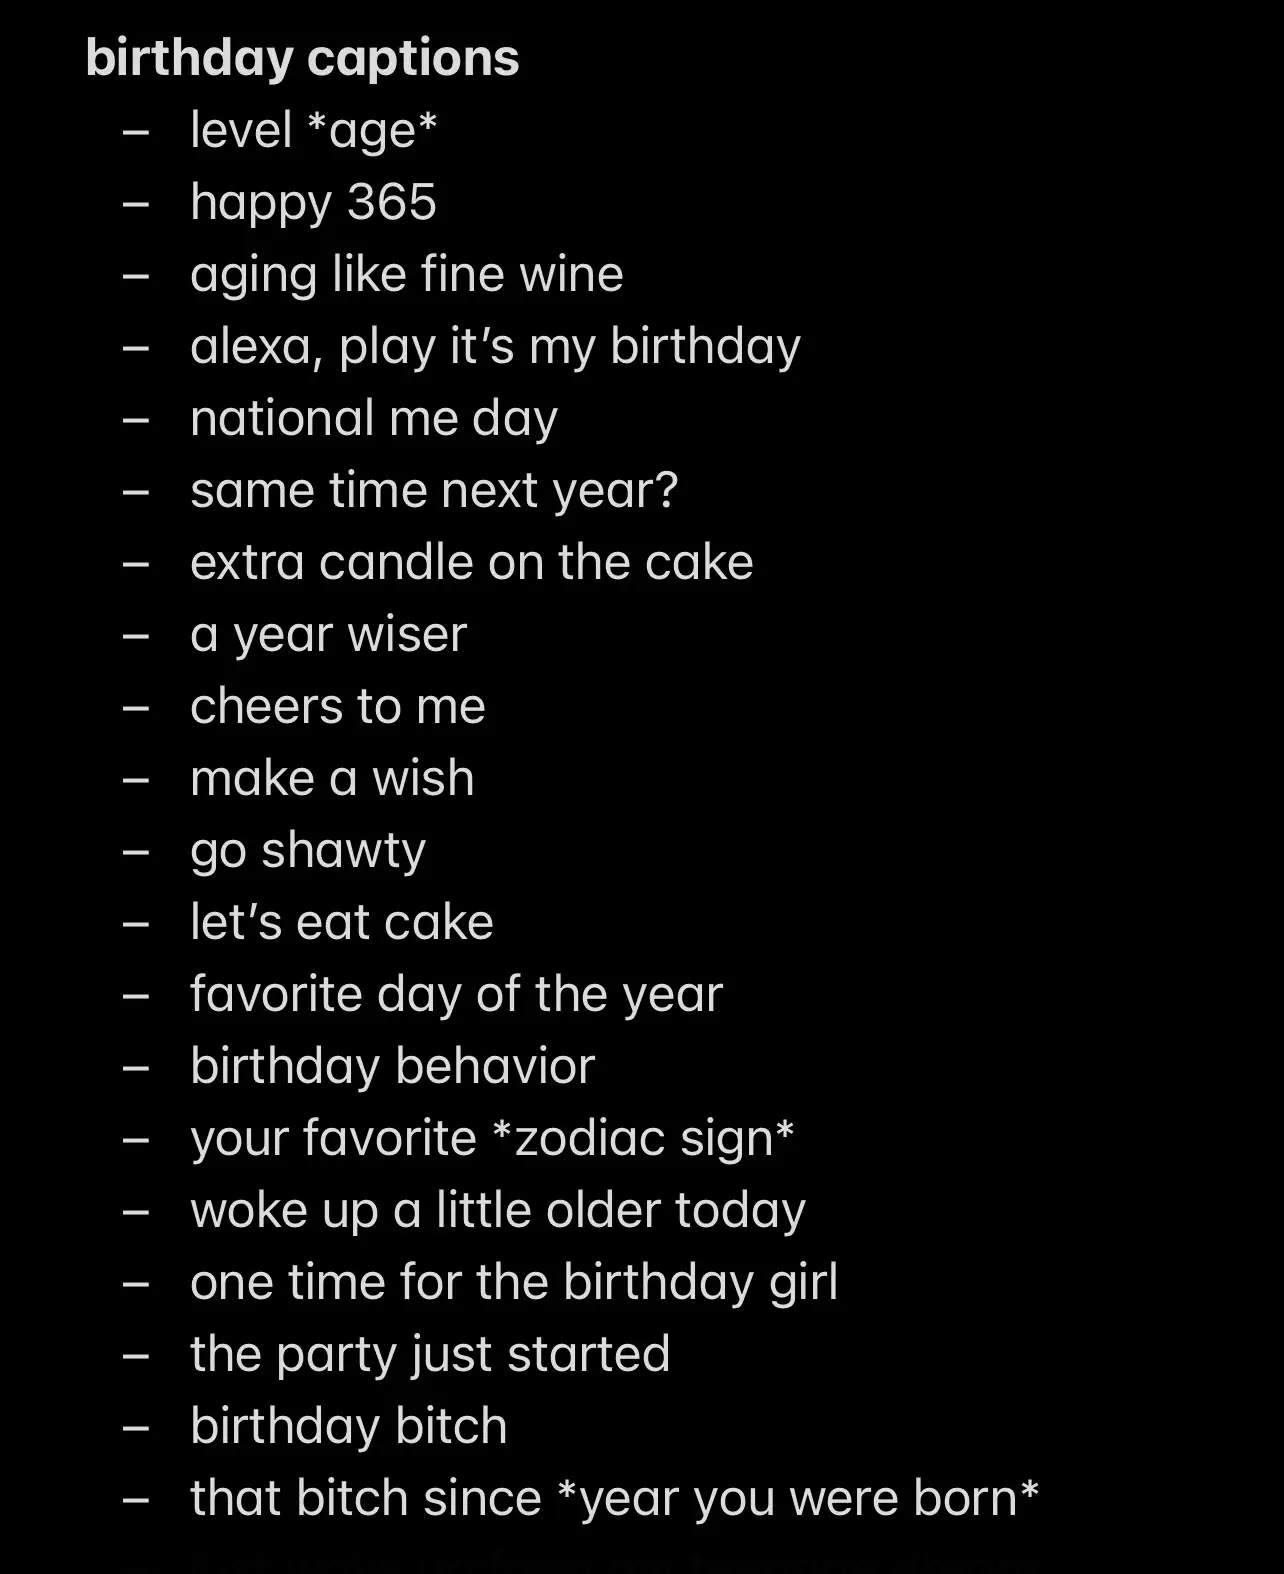  A list of wishes for a birthday